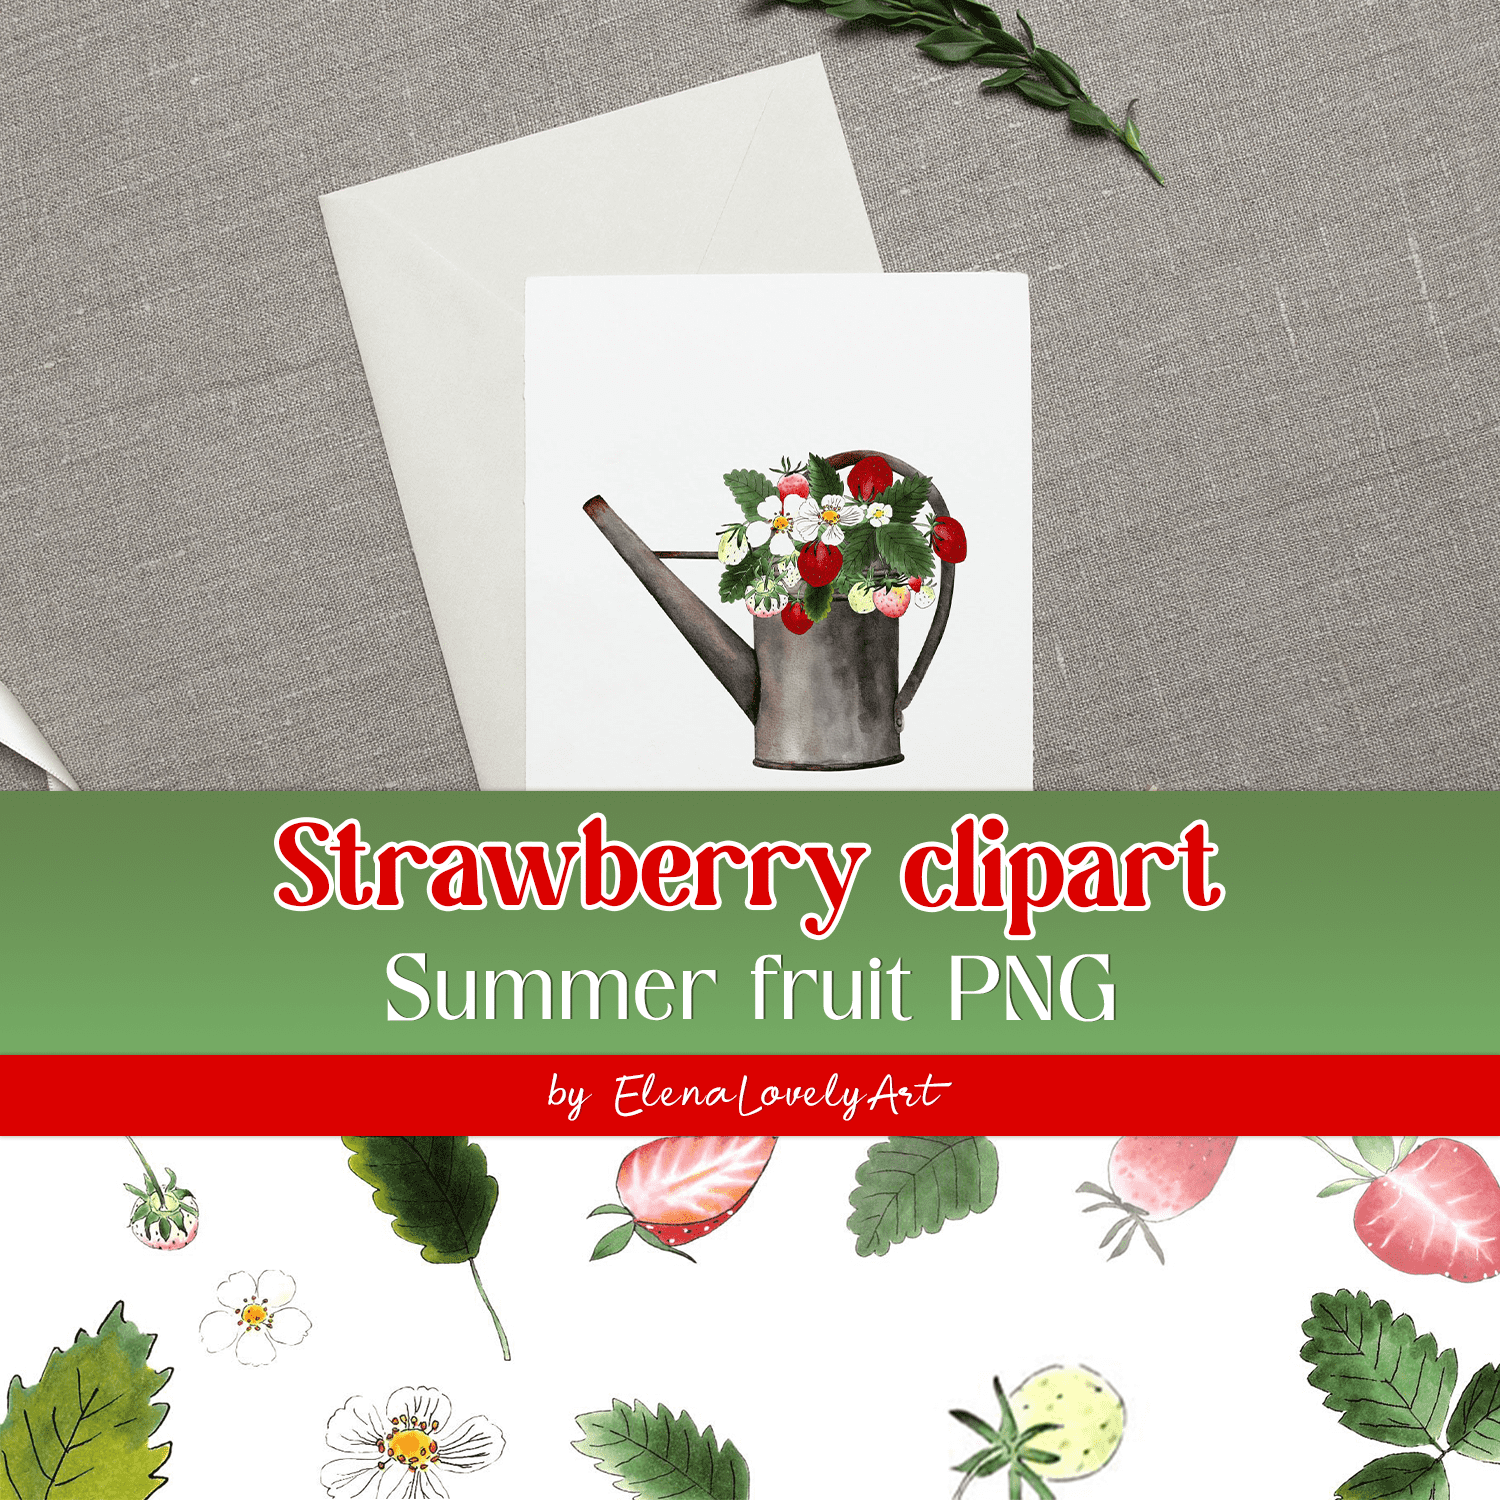 Strawberry Clipart. Summer Fruit PNG Cover.